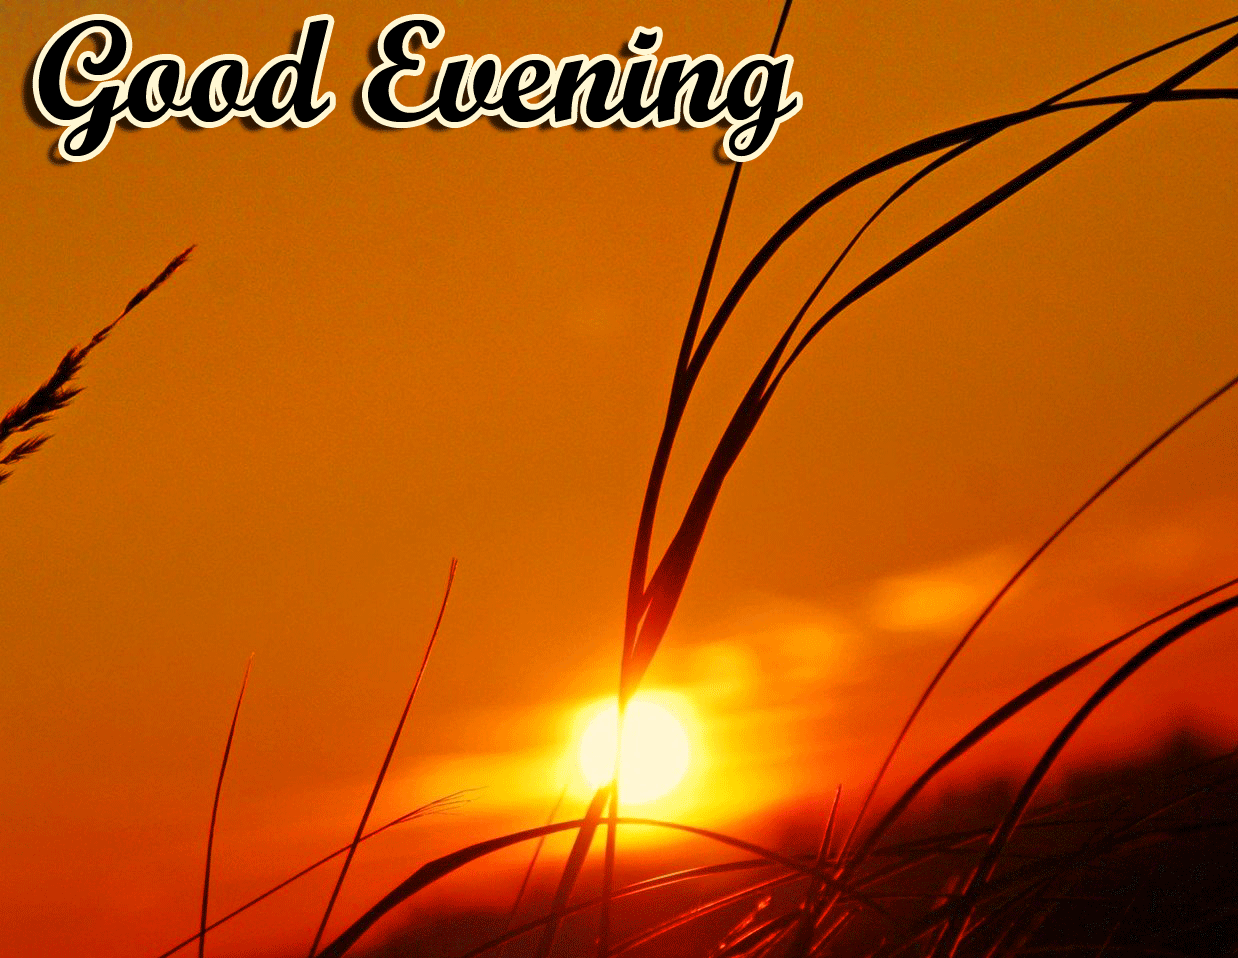 Good Evening Wishes Images Download 30